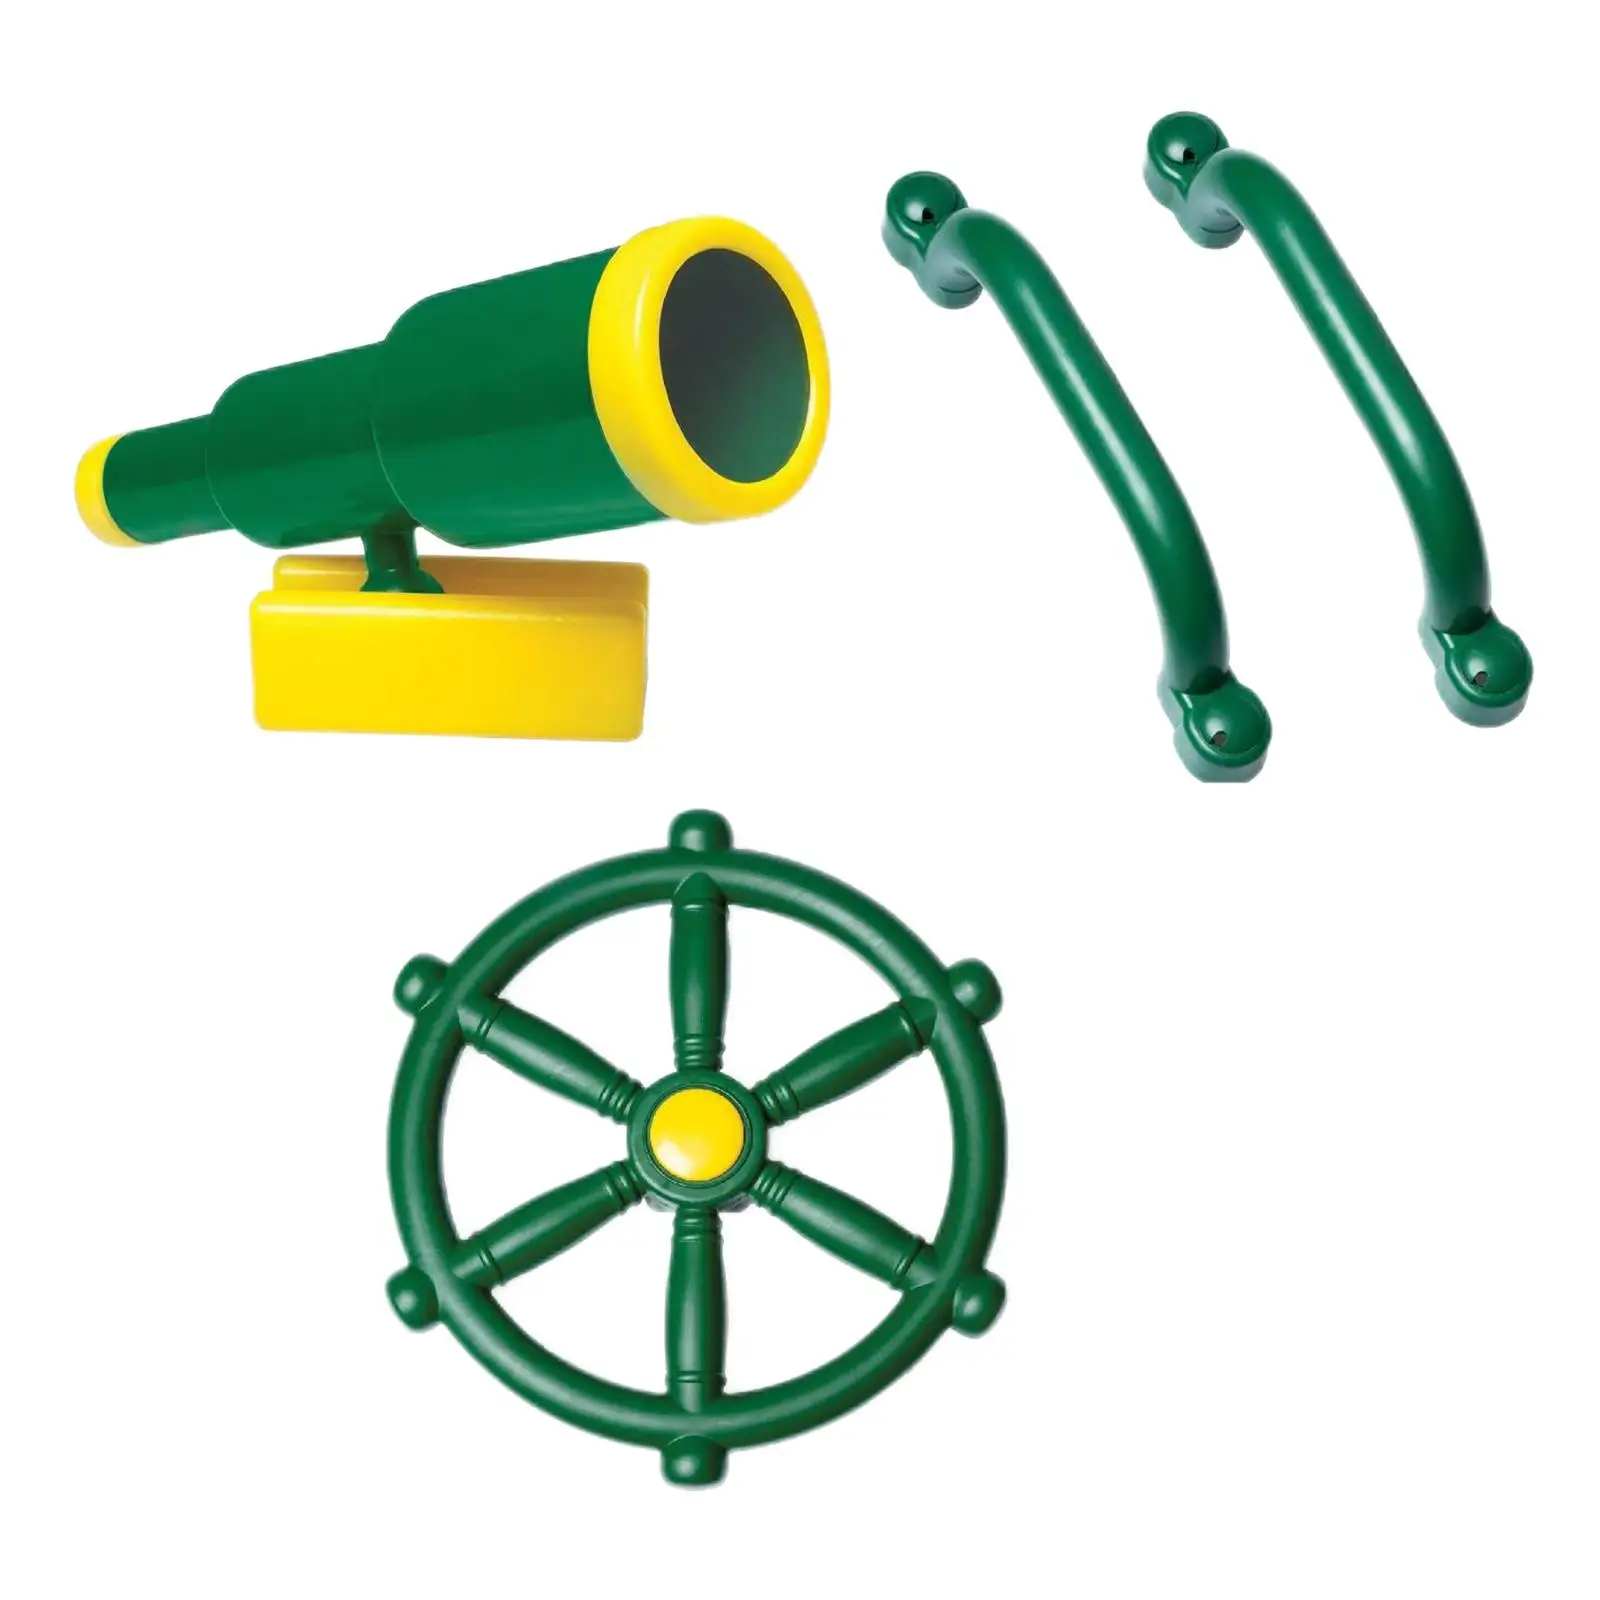 4x  Playground Equipment Set,Kids Pirate Telescope Steering  Handle Bars for Gym Treehouse Ages 3 & Older Boys And Girls